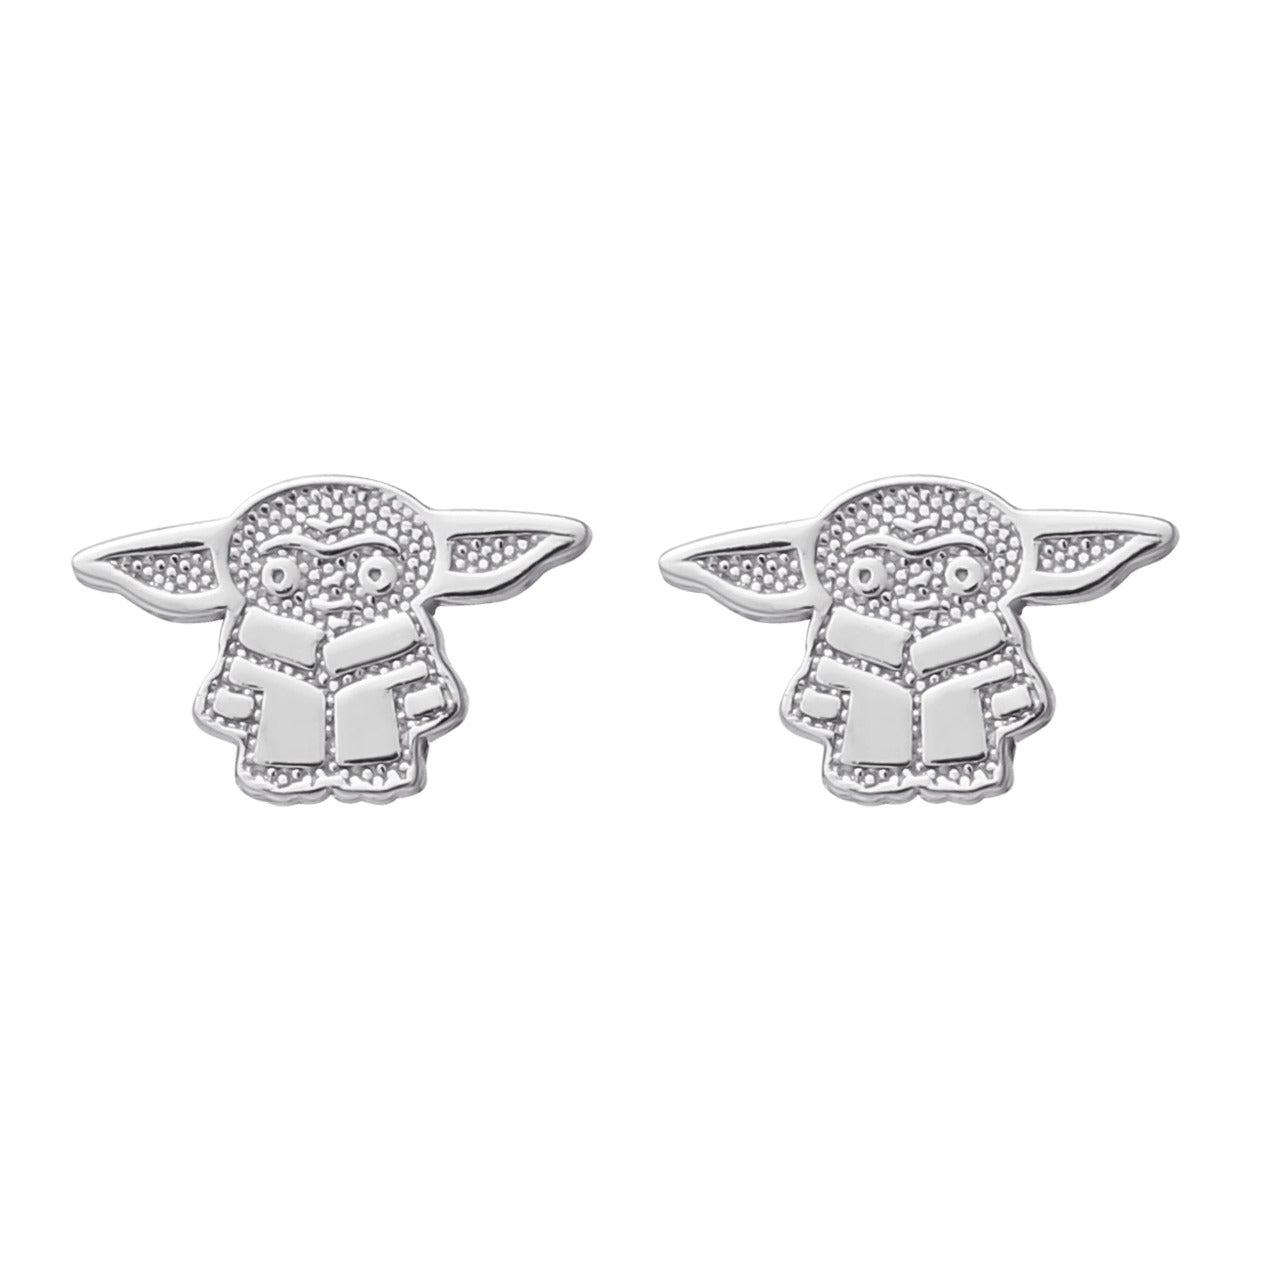 Disney Baby Yoda Sterling Silver Earrings  These exquisitely designed Baby Yoda Sterling Silver Earrings, form a silhouette of Yoda's famous pose adding a touch of class and fun jewellery.  Trendy and fashionable design, the Disney Baby Yoda earrings adds a chic, fun touch to any outfit.